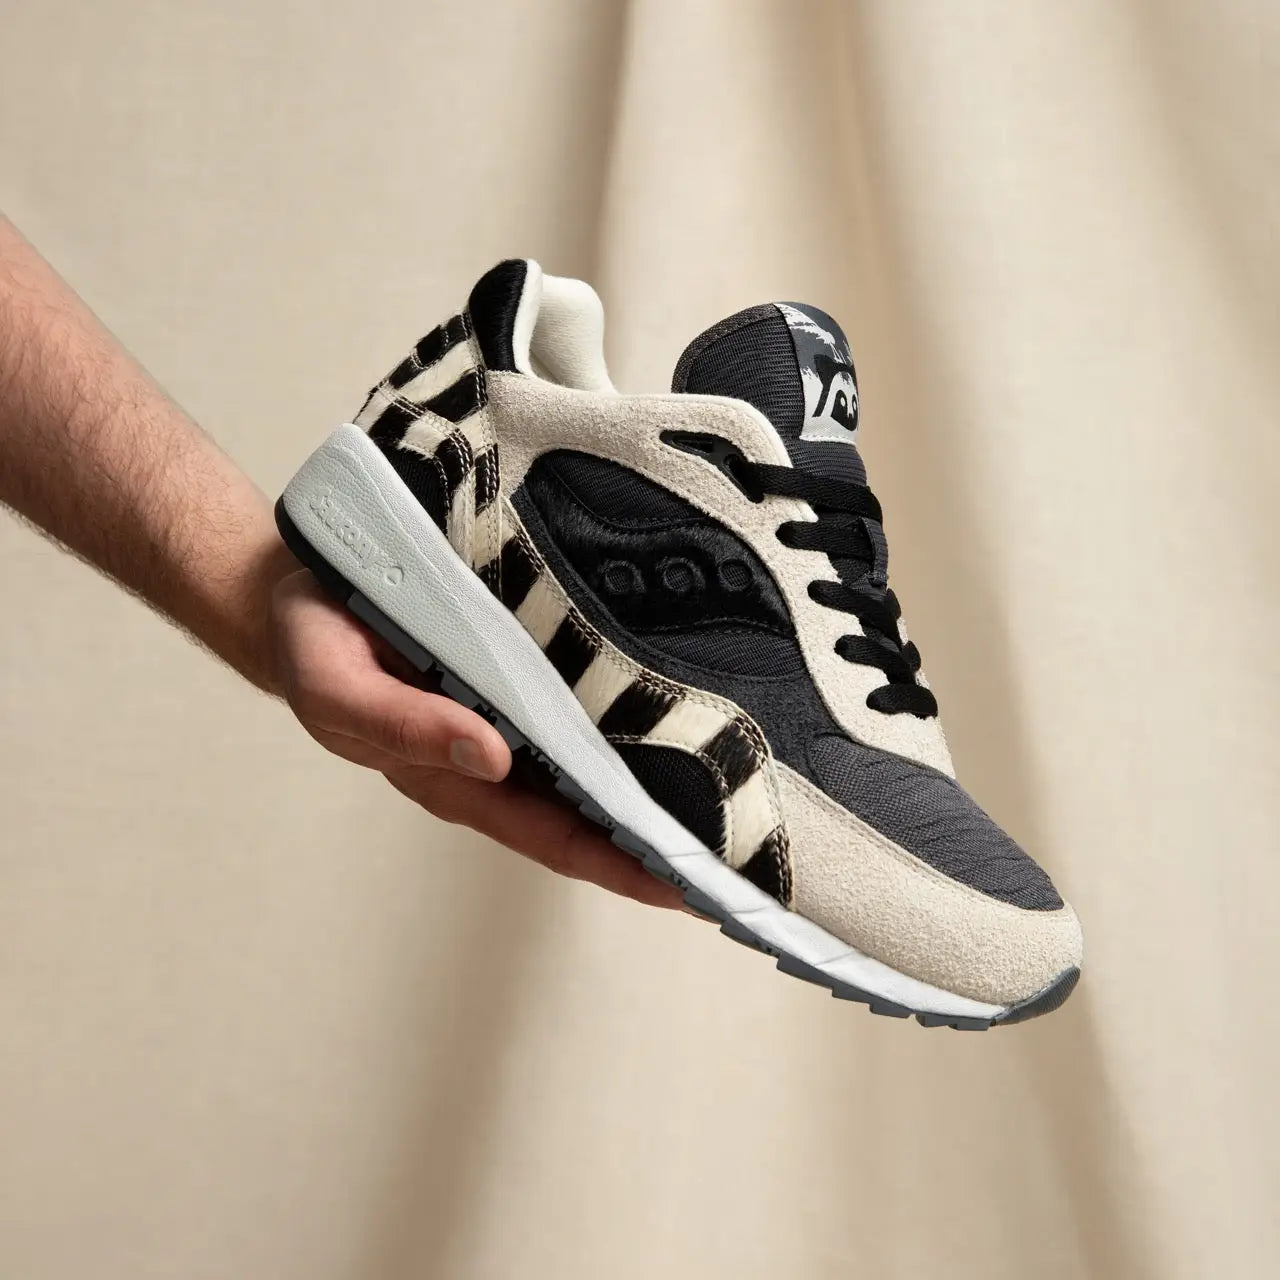 Introducing the Saucony Shadow 6000 ’Racoon’ for this coming FW Collection